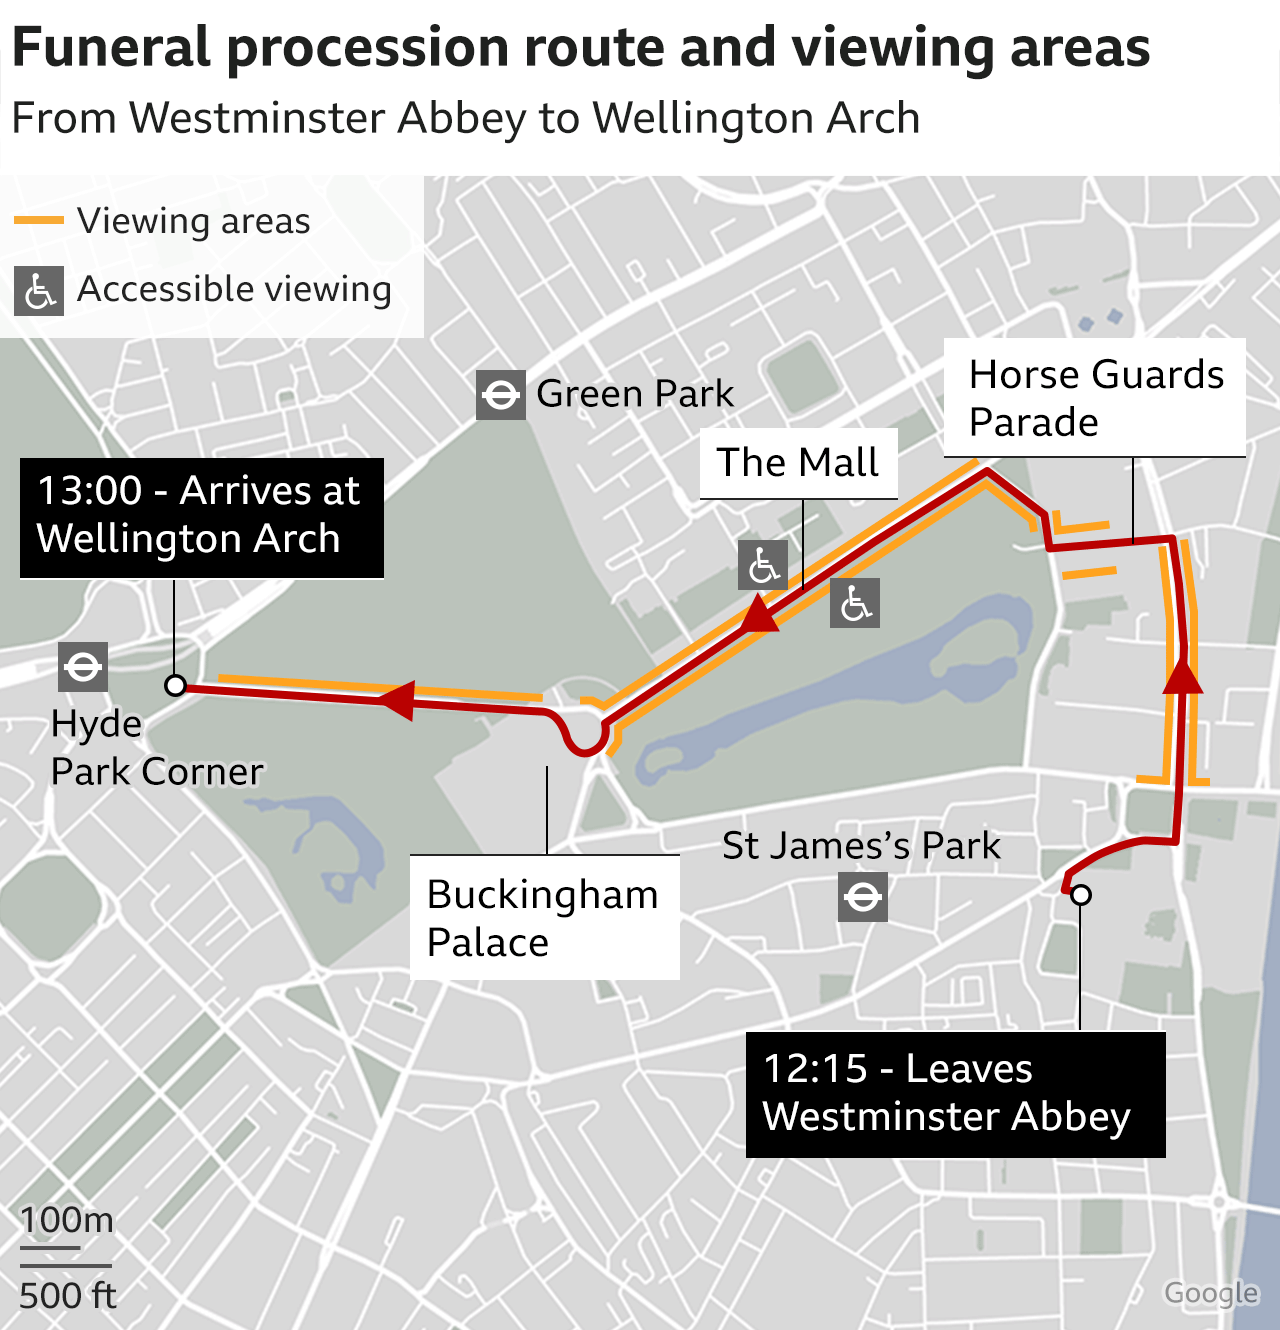 Route of the funeral procession from Westminster Abbey to Wellington Arch